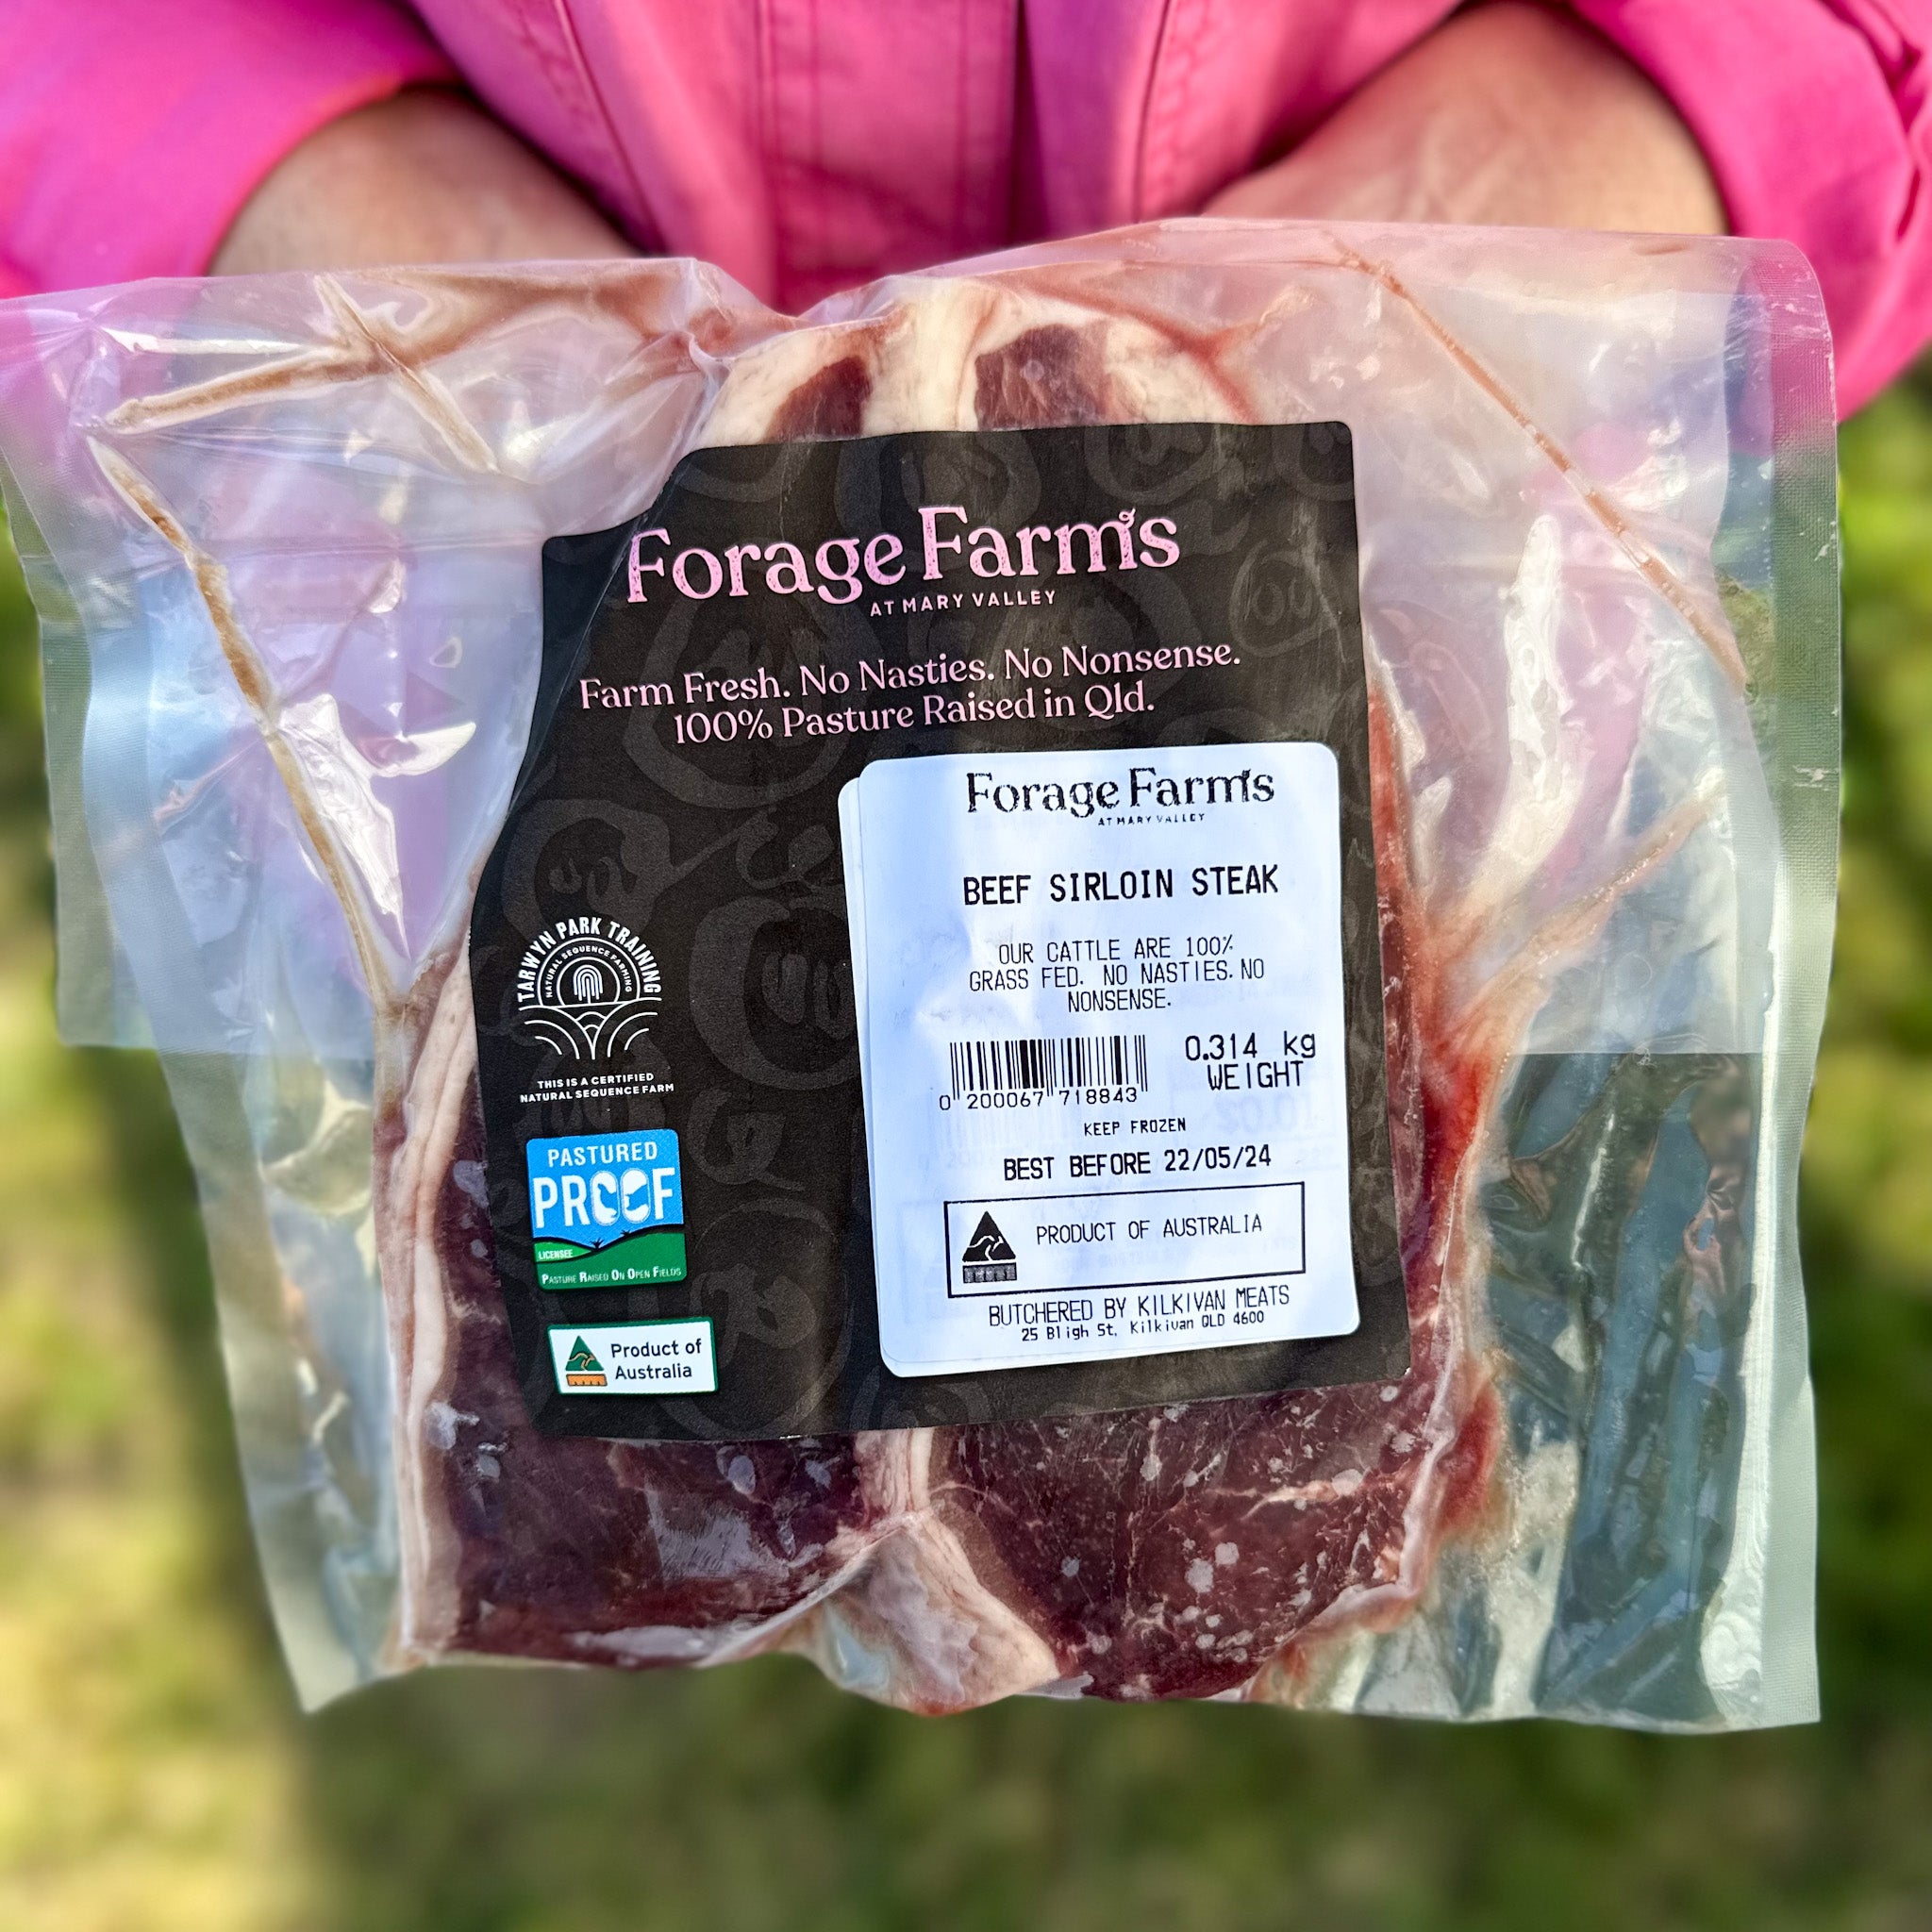 Forage Farms Grass Fed & Finished Beef Sirloin Steak